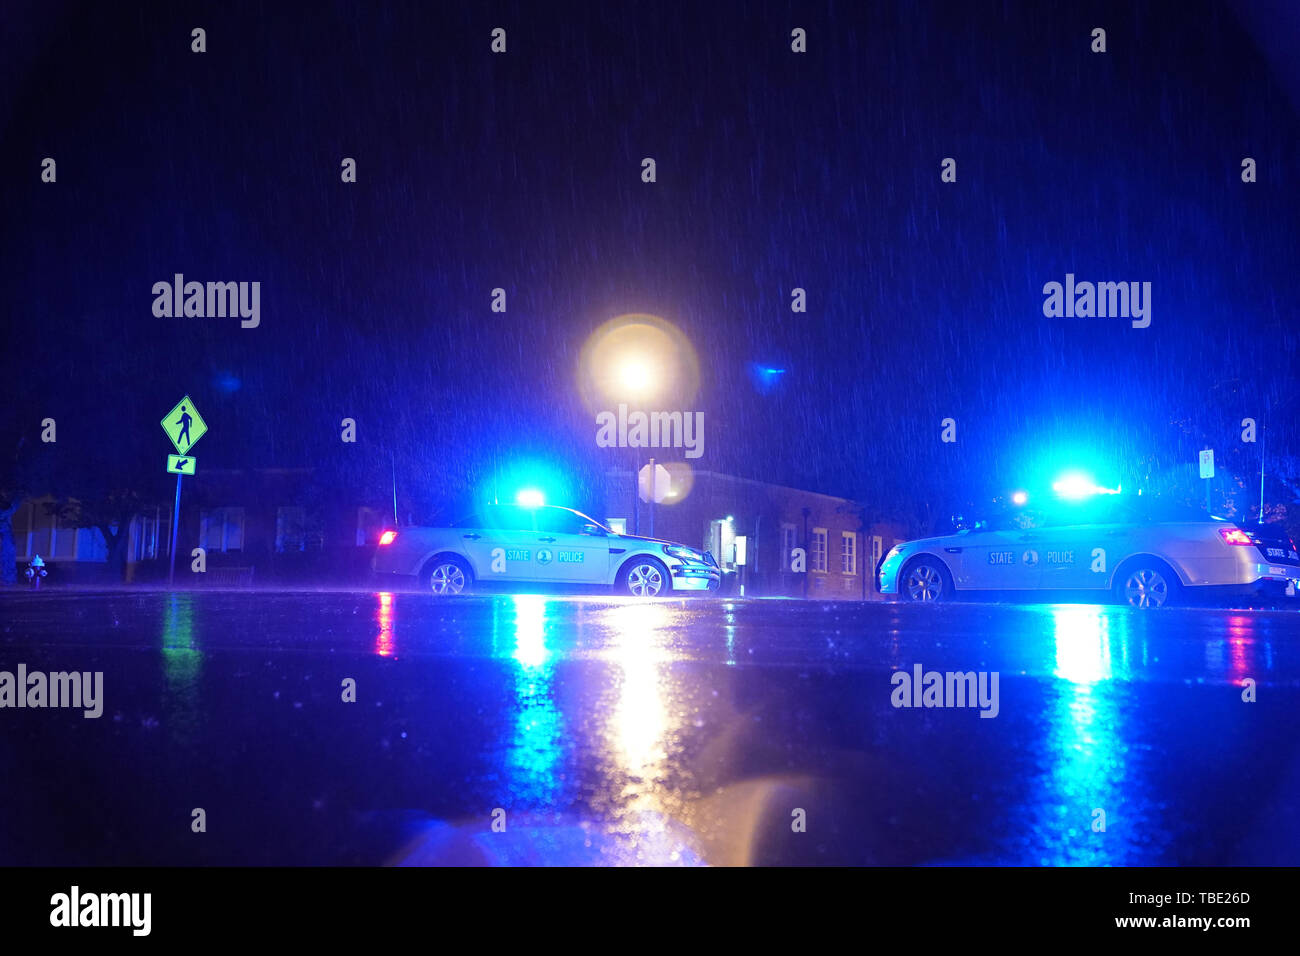 Virginia Beach, Virginia, USA. 1st June, 2019. Photo taken on June 1, 2019 shows Virginia State Police cruisers near Municipal Center in Virginia Beach, Virginia, the United States. The death toll rose to 12 plus the suspect shooter in a mass shooting on Friday at the Virginia Beach Municipal Center in the eastern U.S. state of Virginia, local police said. The 12th victim died on the way to the hospital, said Virginia Beach Police Chief Jim Cervera, adding that four others were injured. Credit: Liu Jie/Xinhua/Alamy Live News Stock Photo